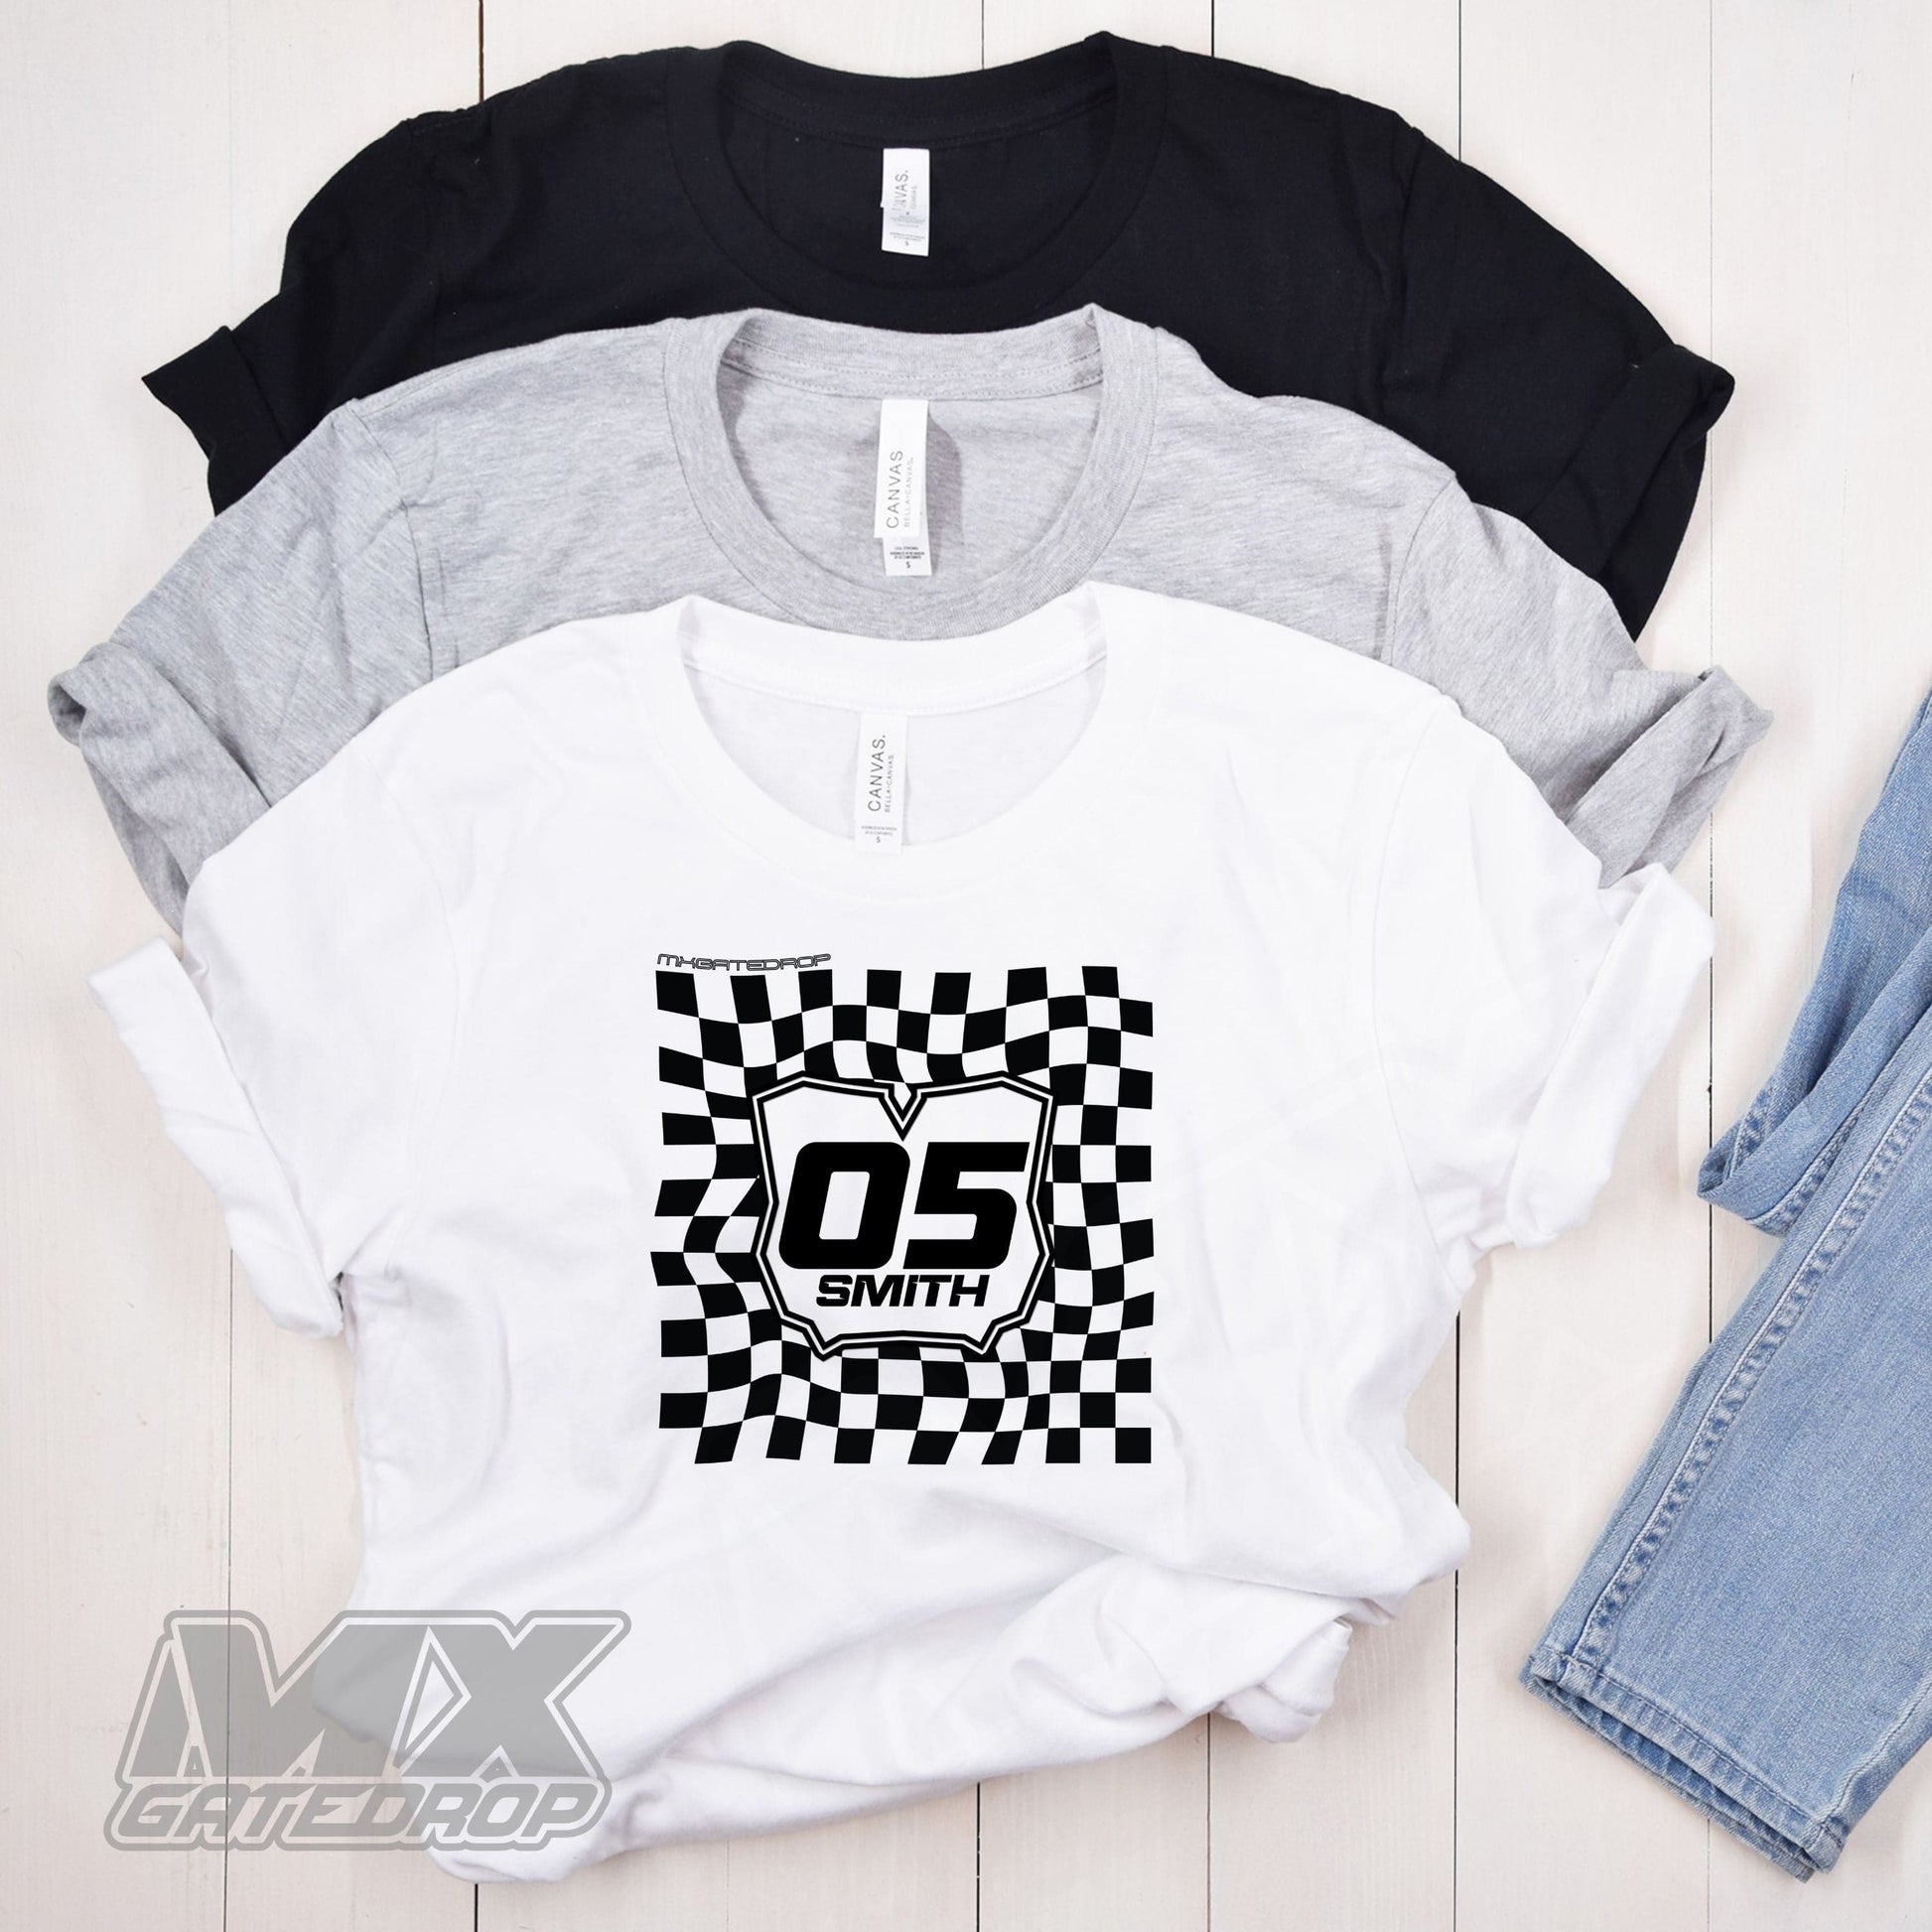 Personalized Checkered Plate Shirt